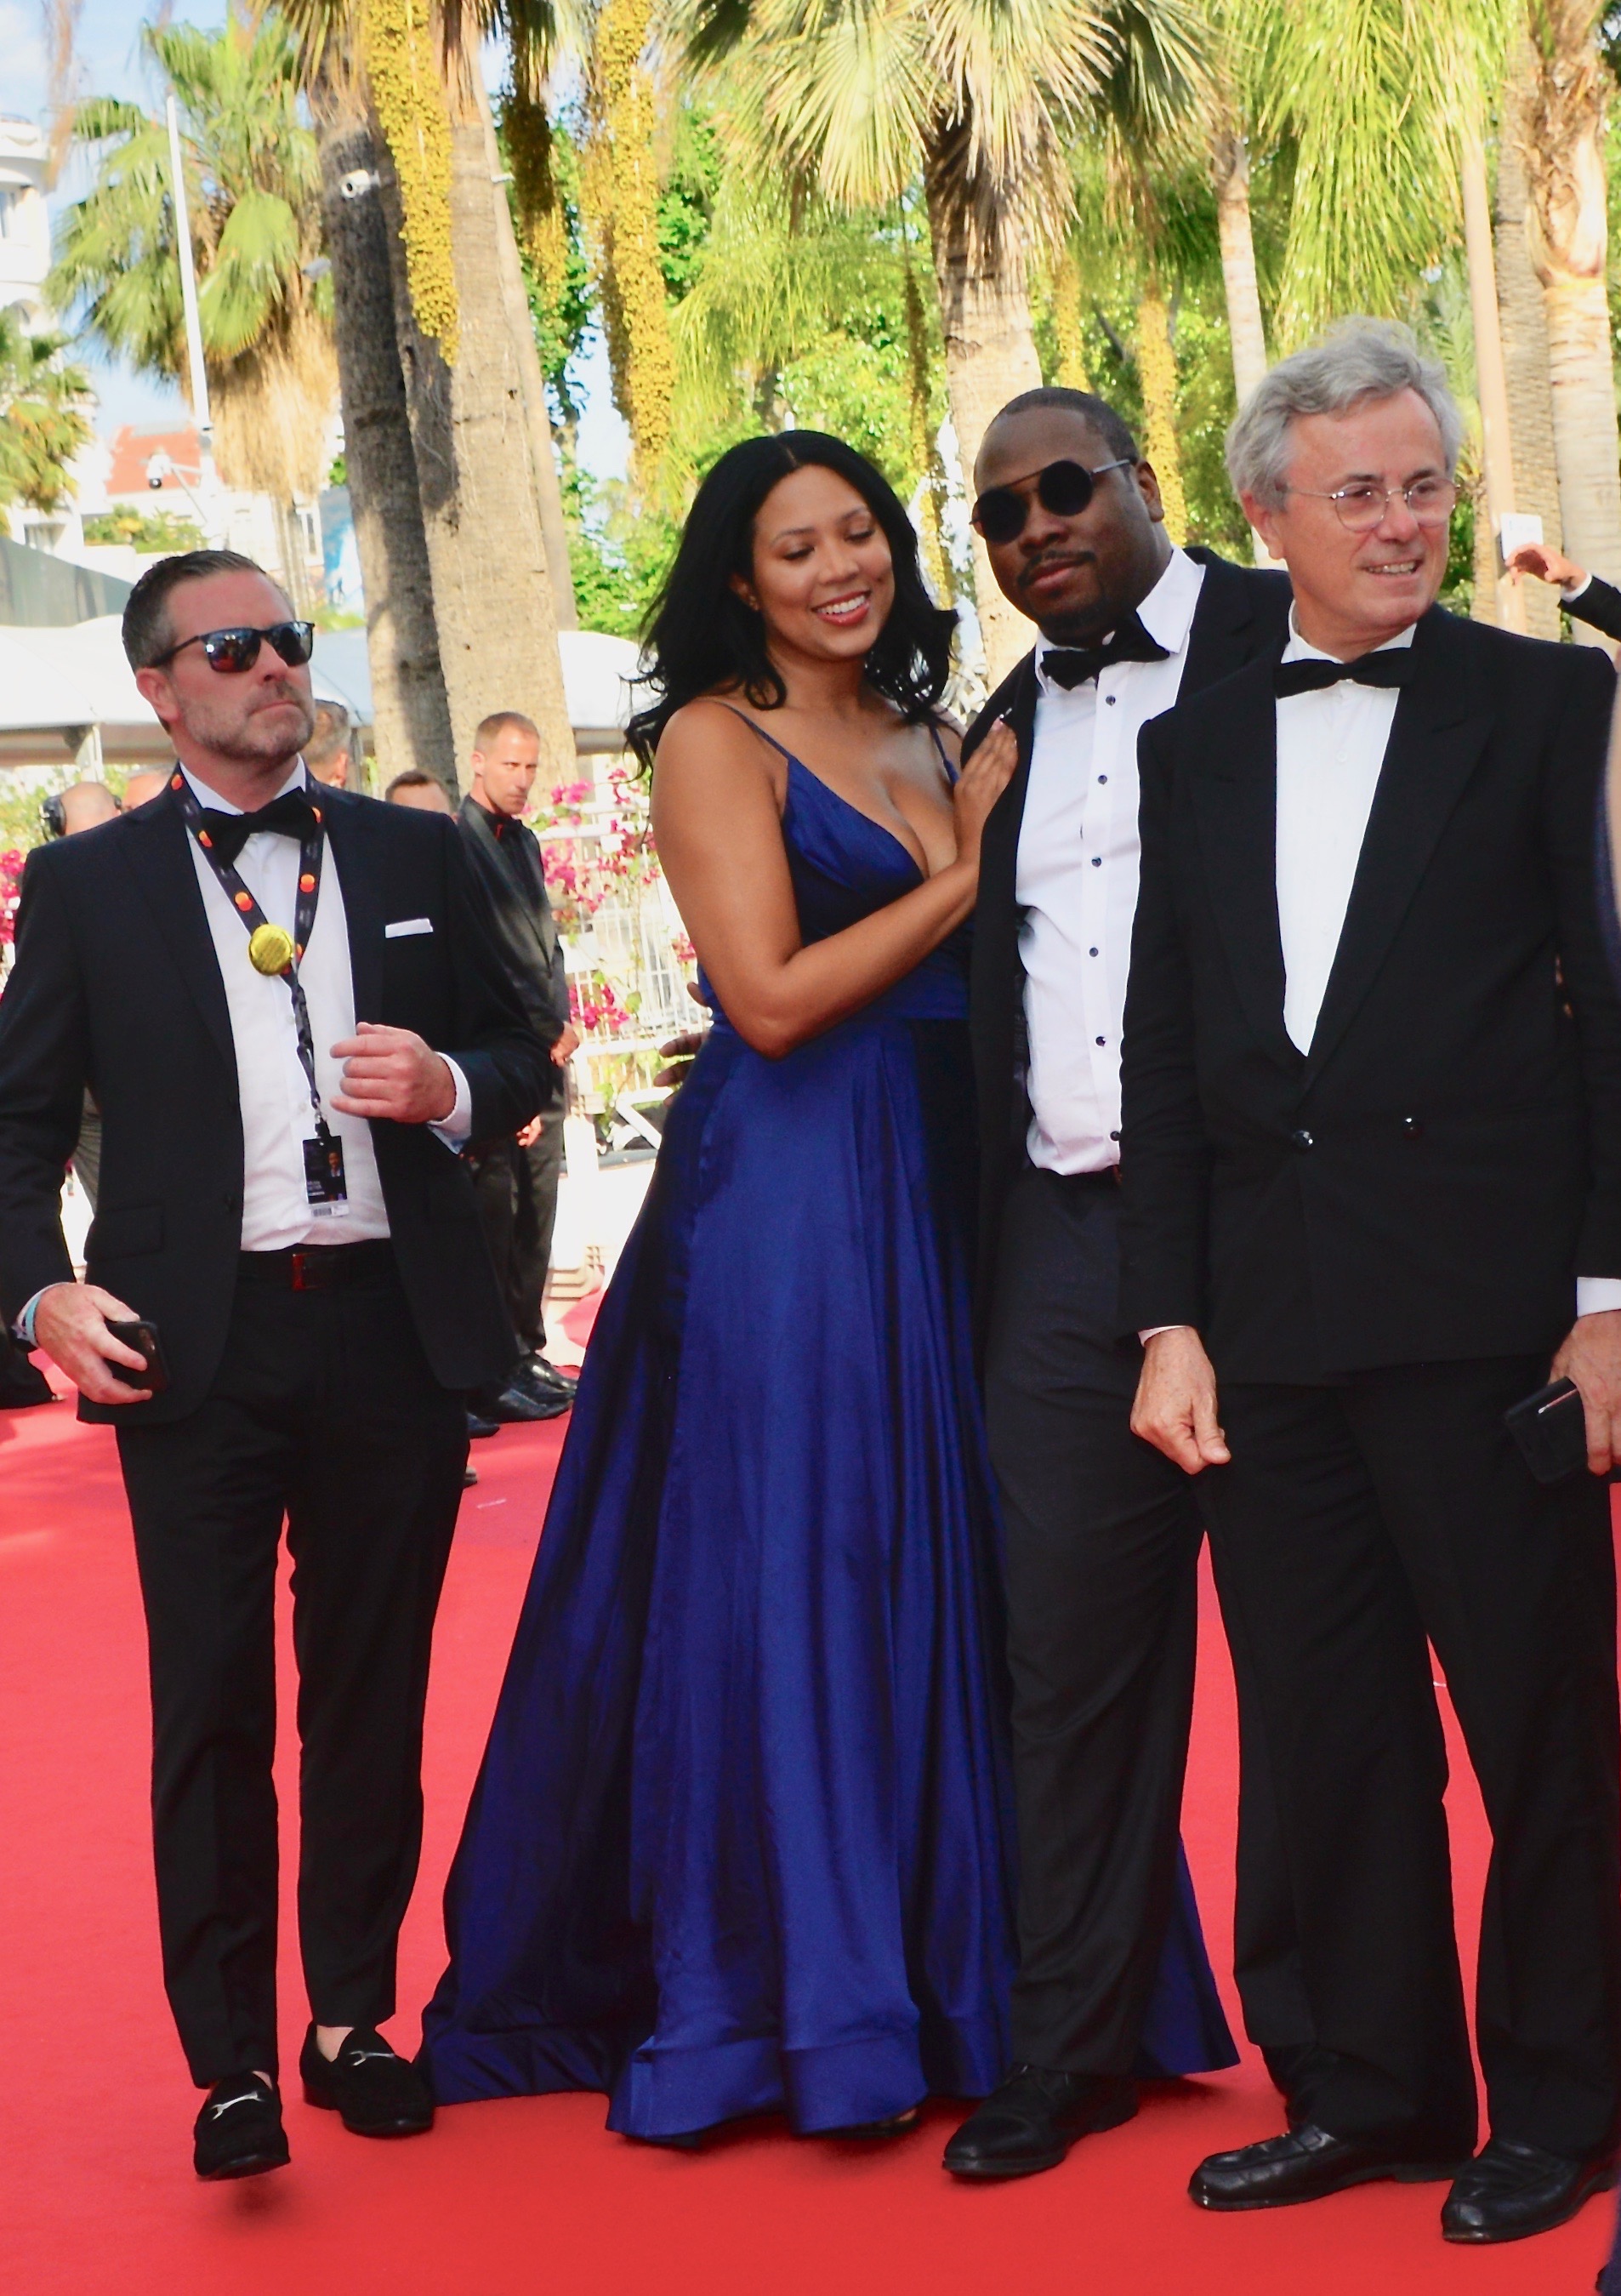 Jon Gosier and Team FilmHedge on the Red Carpet